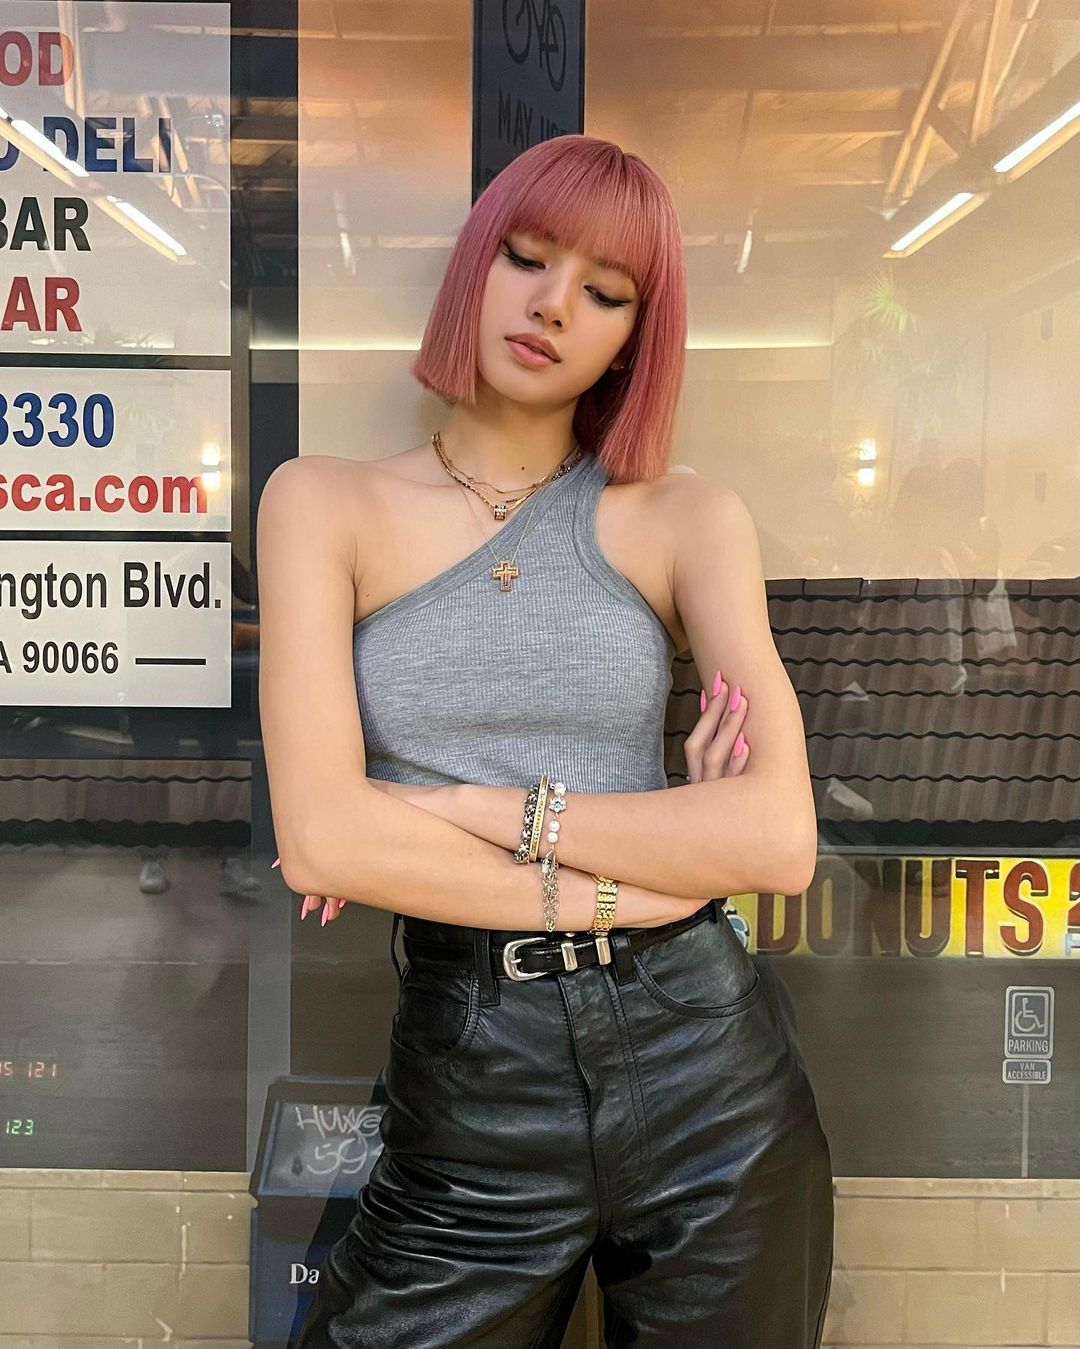 Lisa Blackpink: Celine’s muse, Lisa from Blackpink, has the best outfits